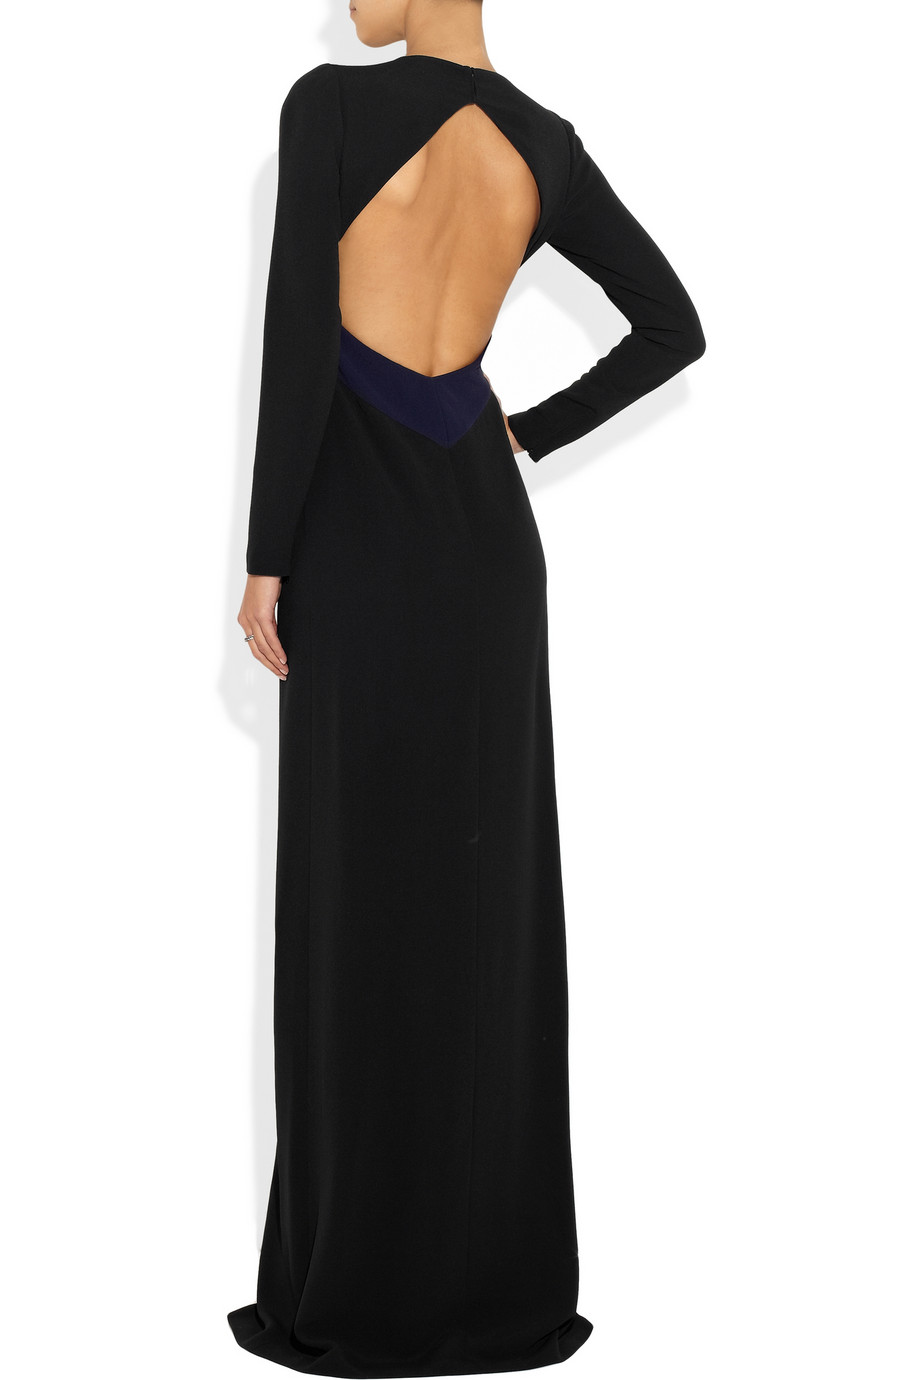 Burberry prorsum Openback Crepe Gown in Black | Lyst